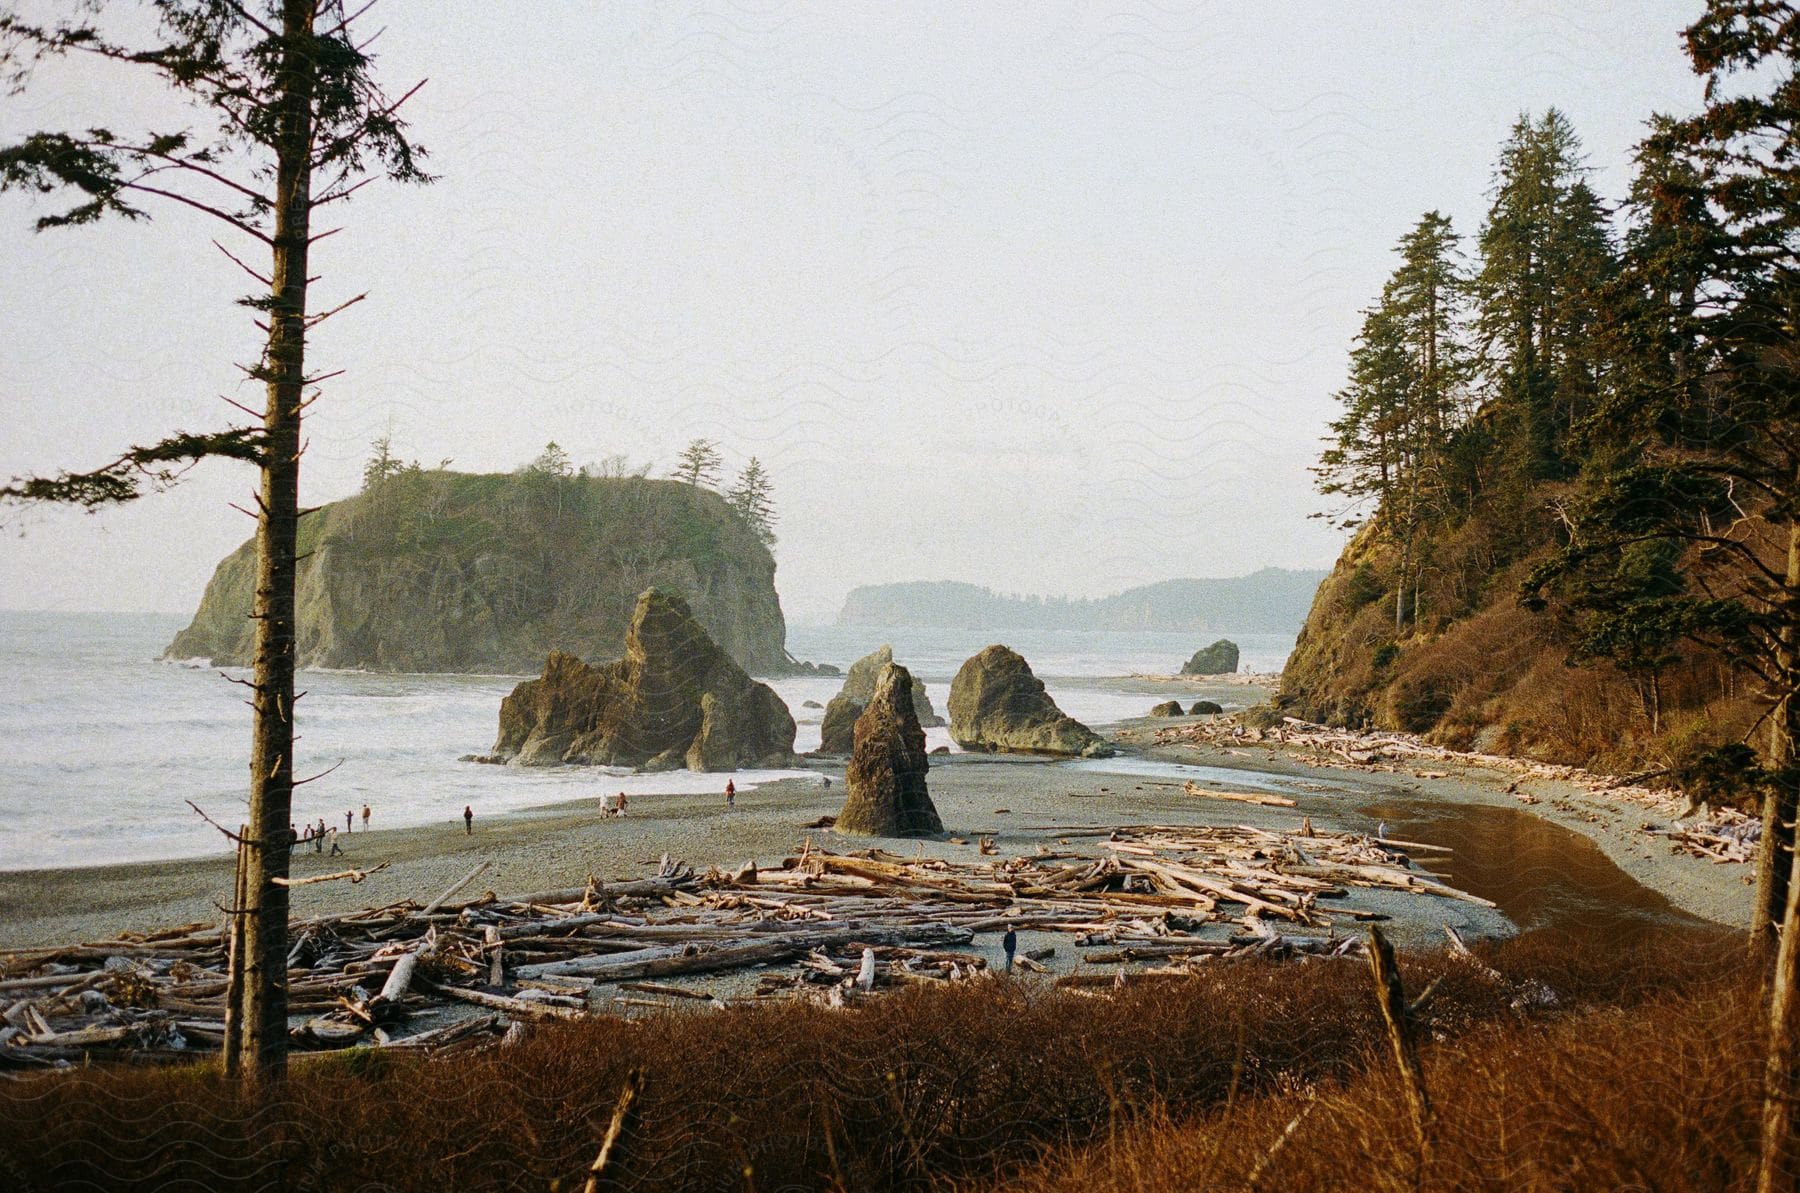 Coastline with driftwood and rock formations, people walking on beach with forested cliffs in background.